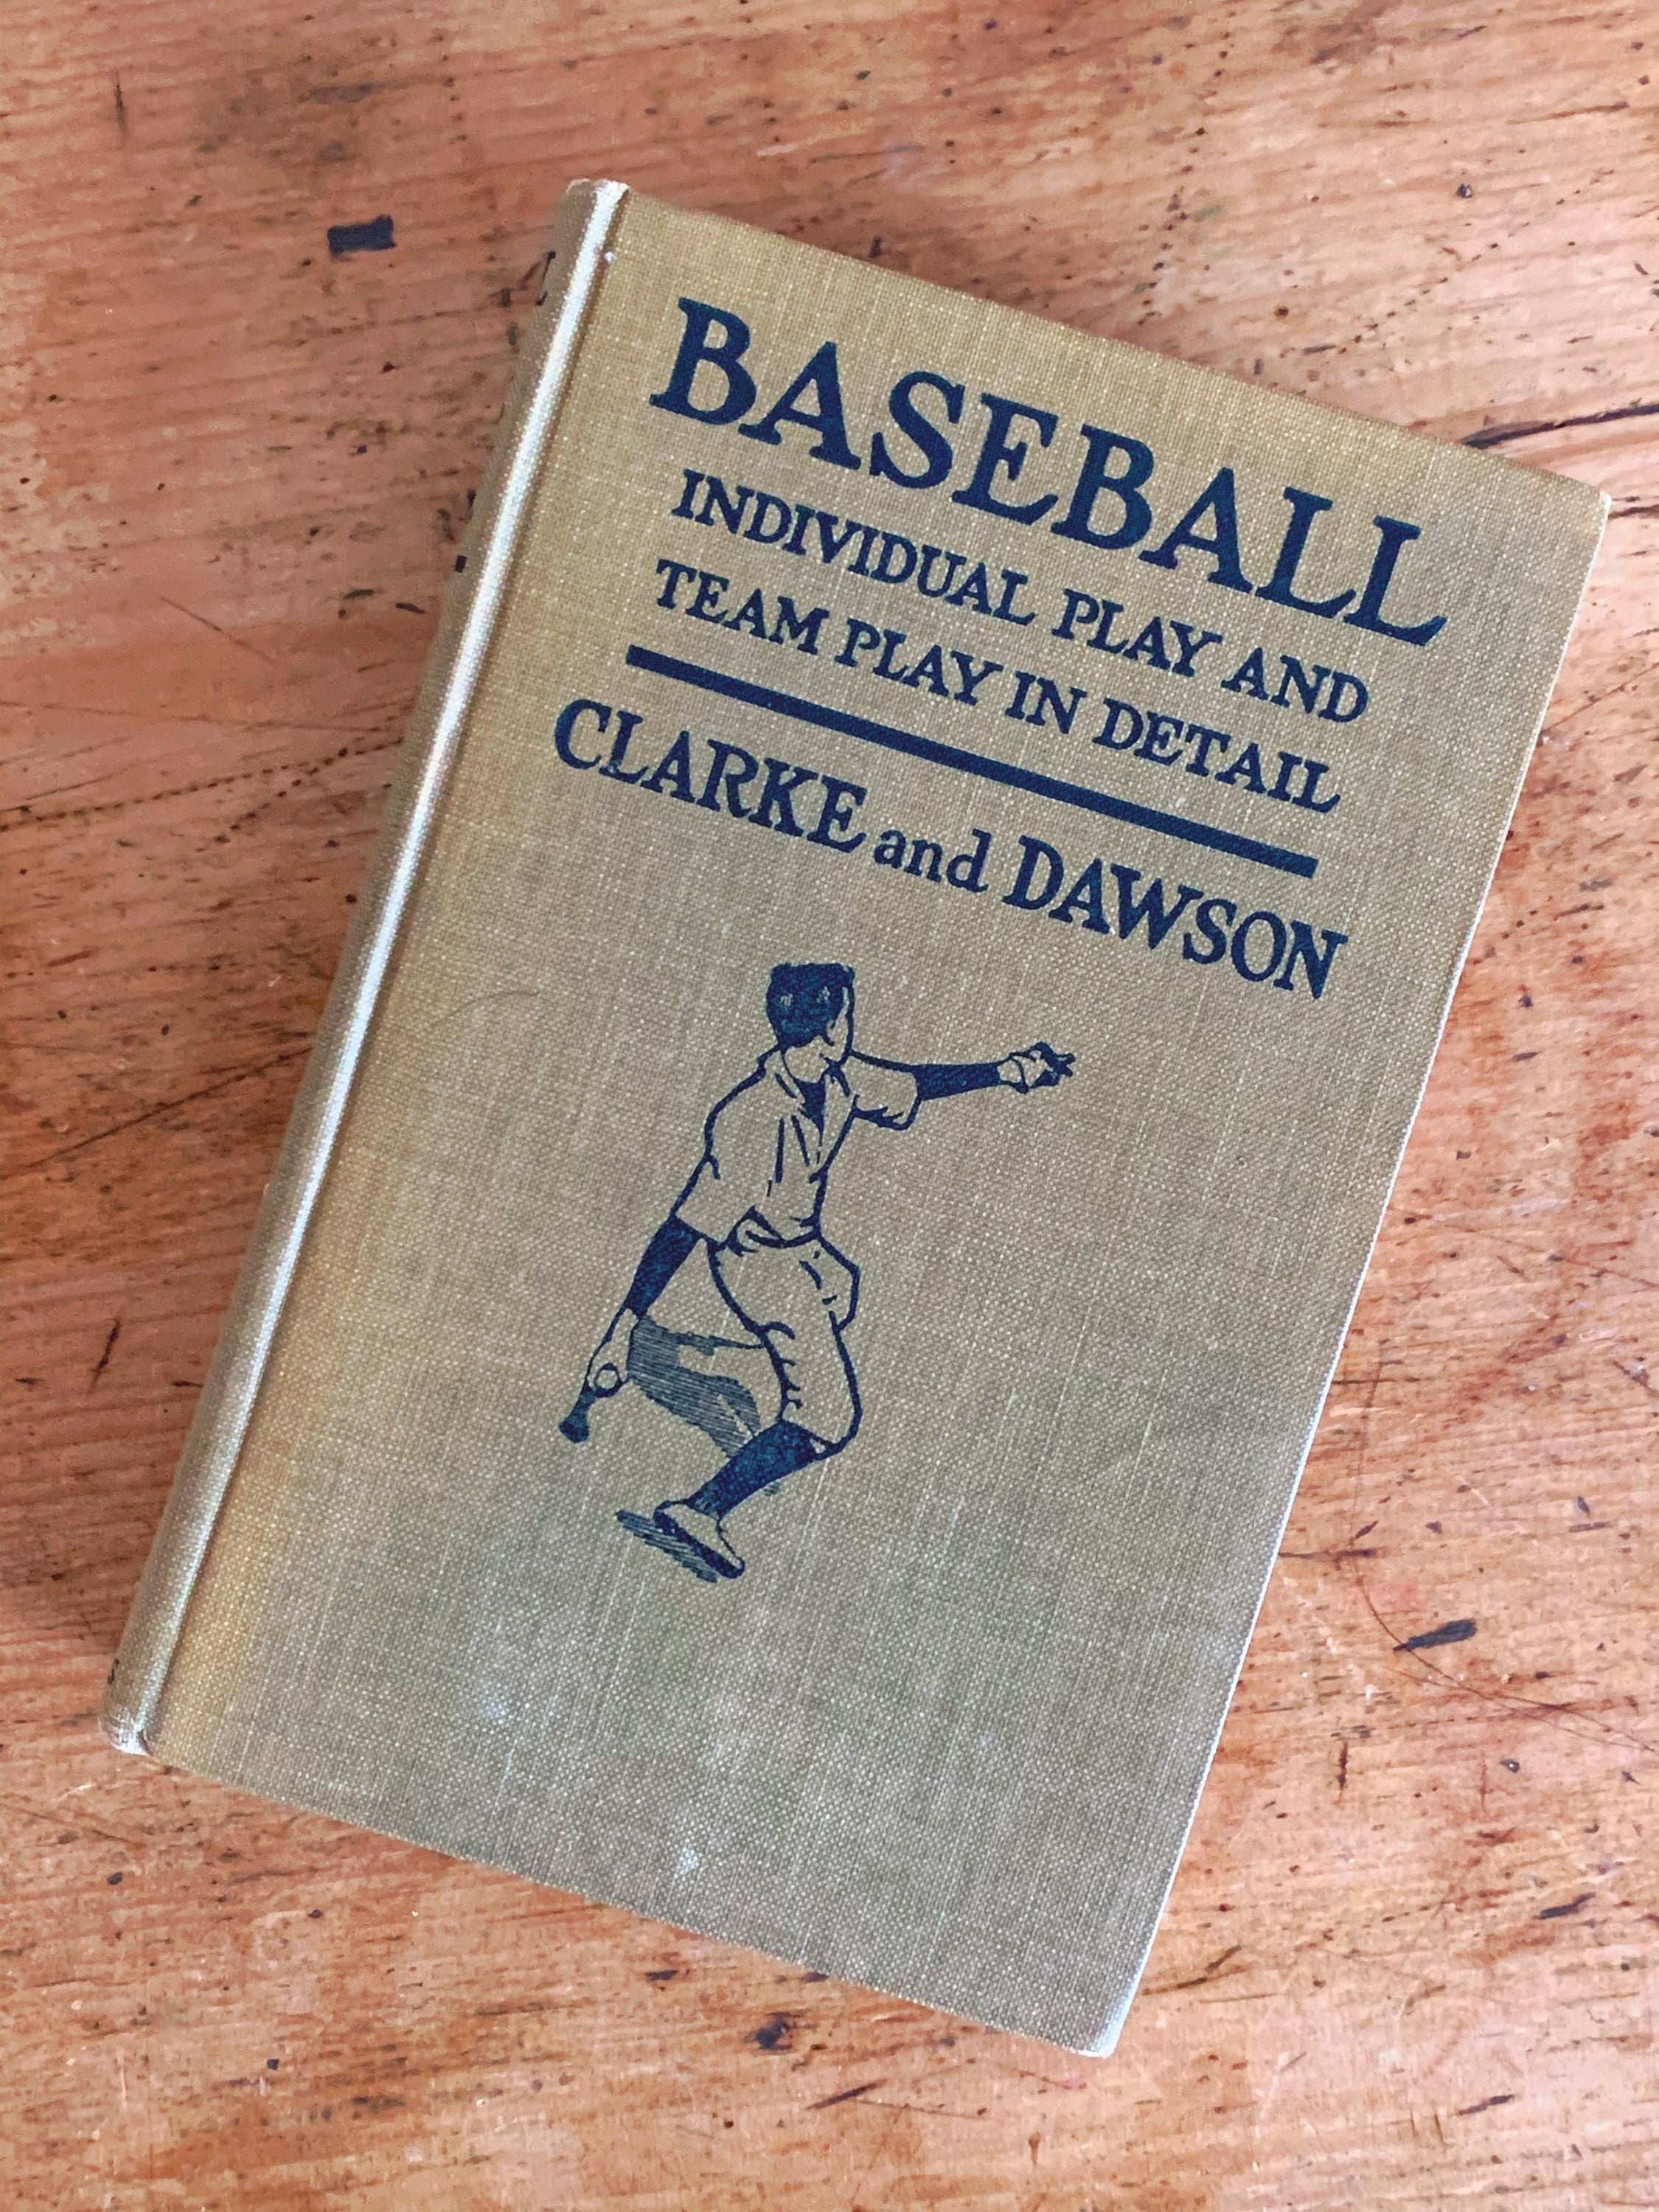 Antique 1915 Baseball, Individual Play and Team Play in Detail by Clarke, W. J and Fredrick T. Dawson | Early Baseball Book